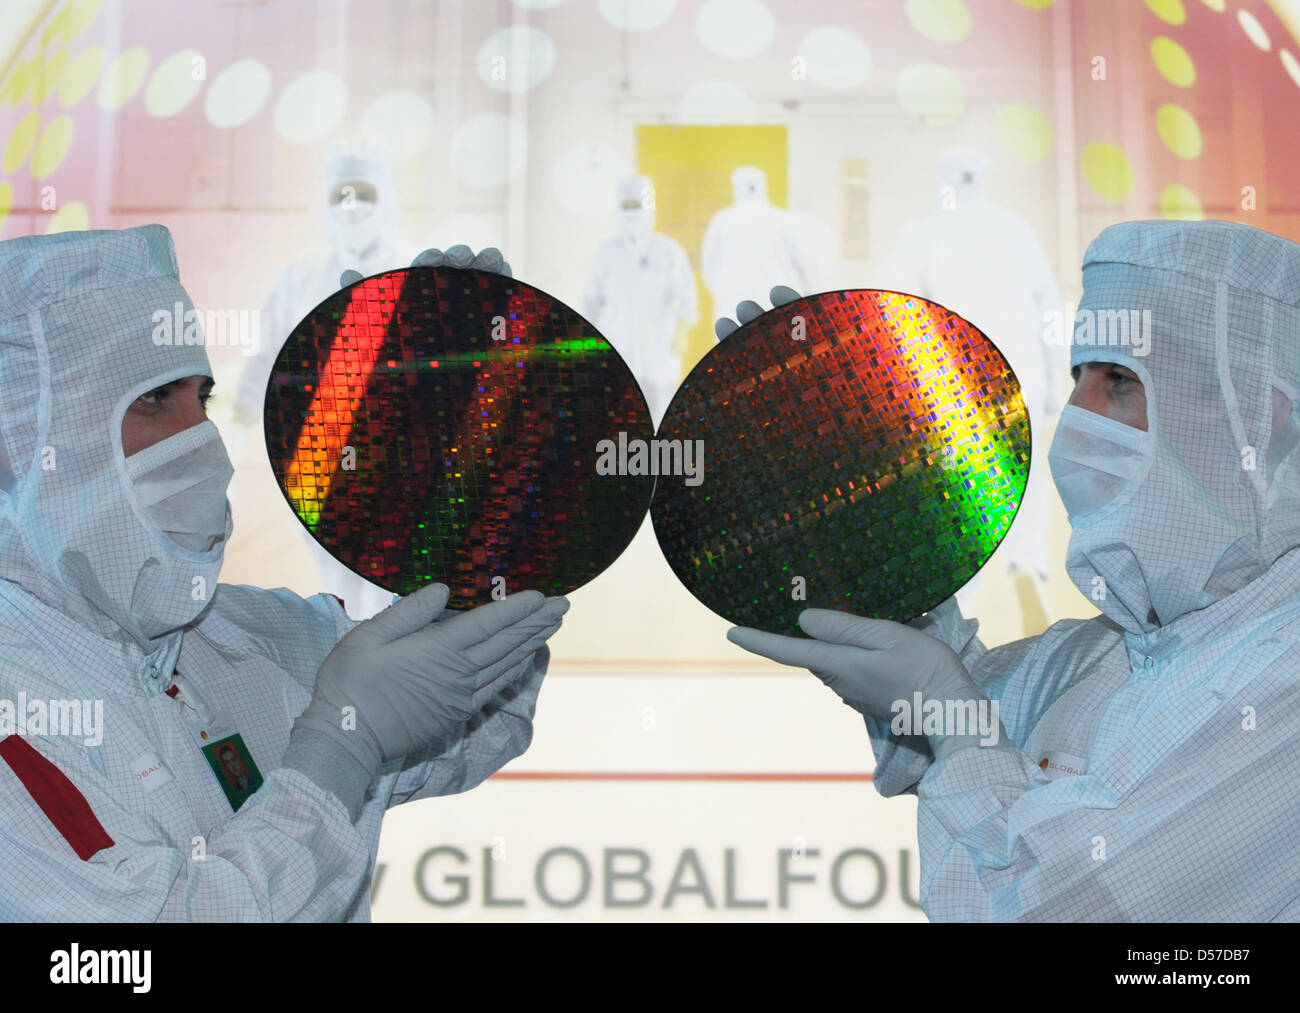 Staff members of chip producer Globalfoundries present wafers during a press conference in Dresden, Germany, 20 January 2010. For developers and users of computer chips, only a faster process was significant. The question of how much energy the devices used or wasted was of no interest in the race for performance speed. Nowadays, energy effiiency has become a major sales argument.  Stock Photo